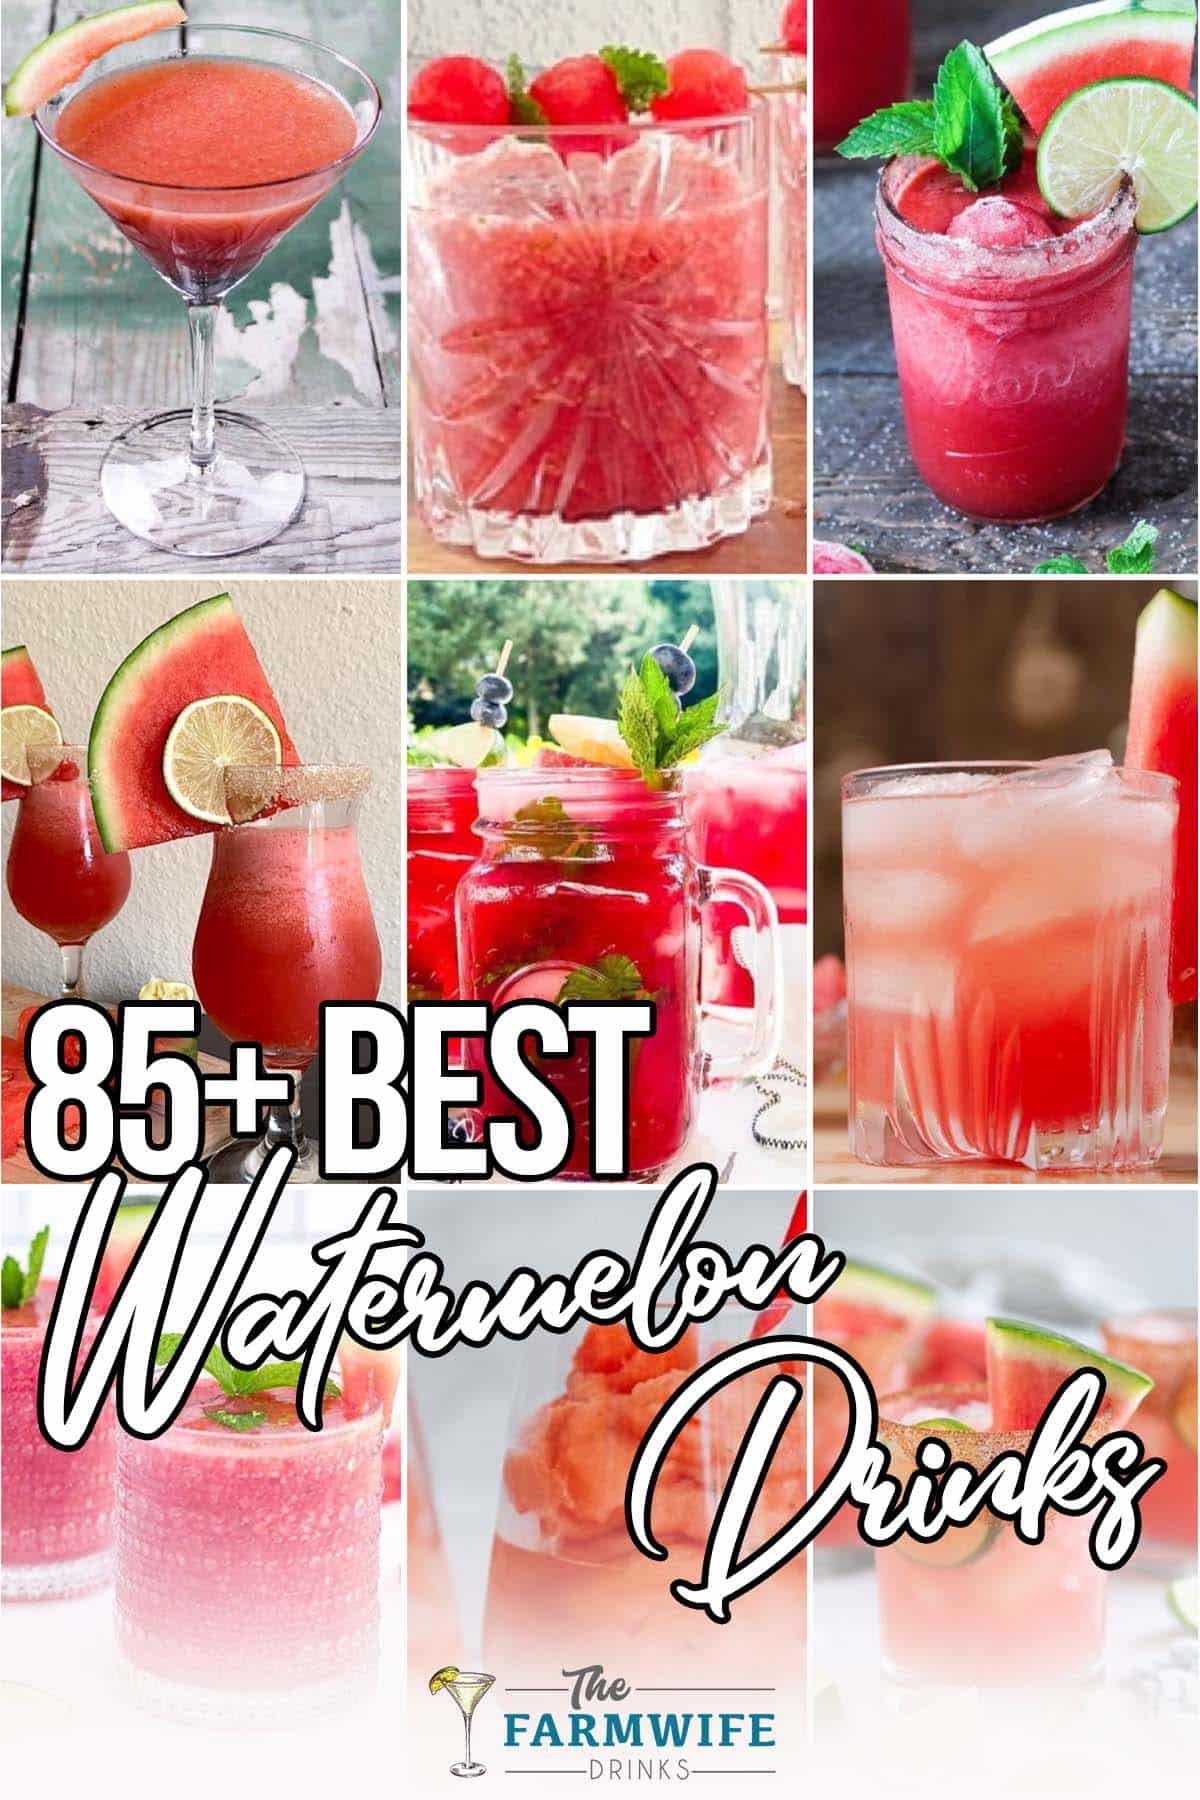 photo collage of watermelon cocktail recipes with text which reads 85+ best watermelon drinks